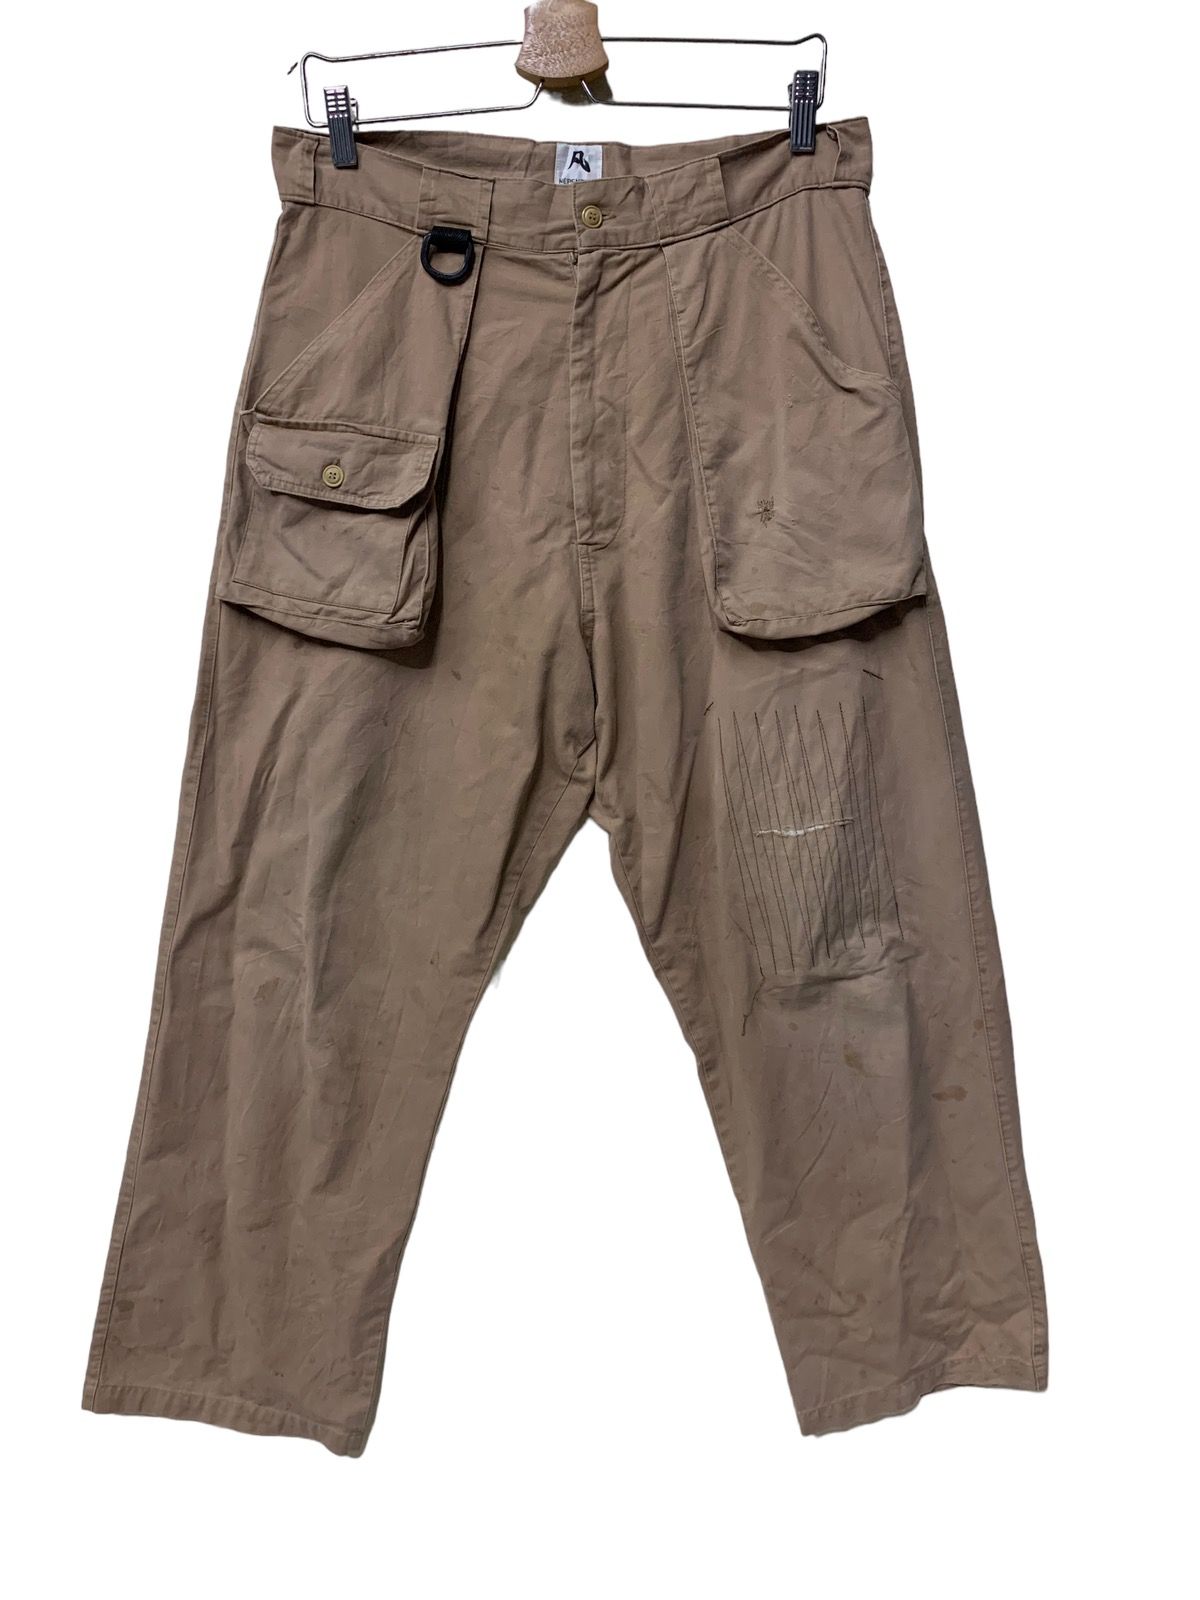 🔥NEPENTHES NY 3Q TACTICAL PANTS - 1